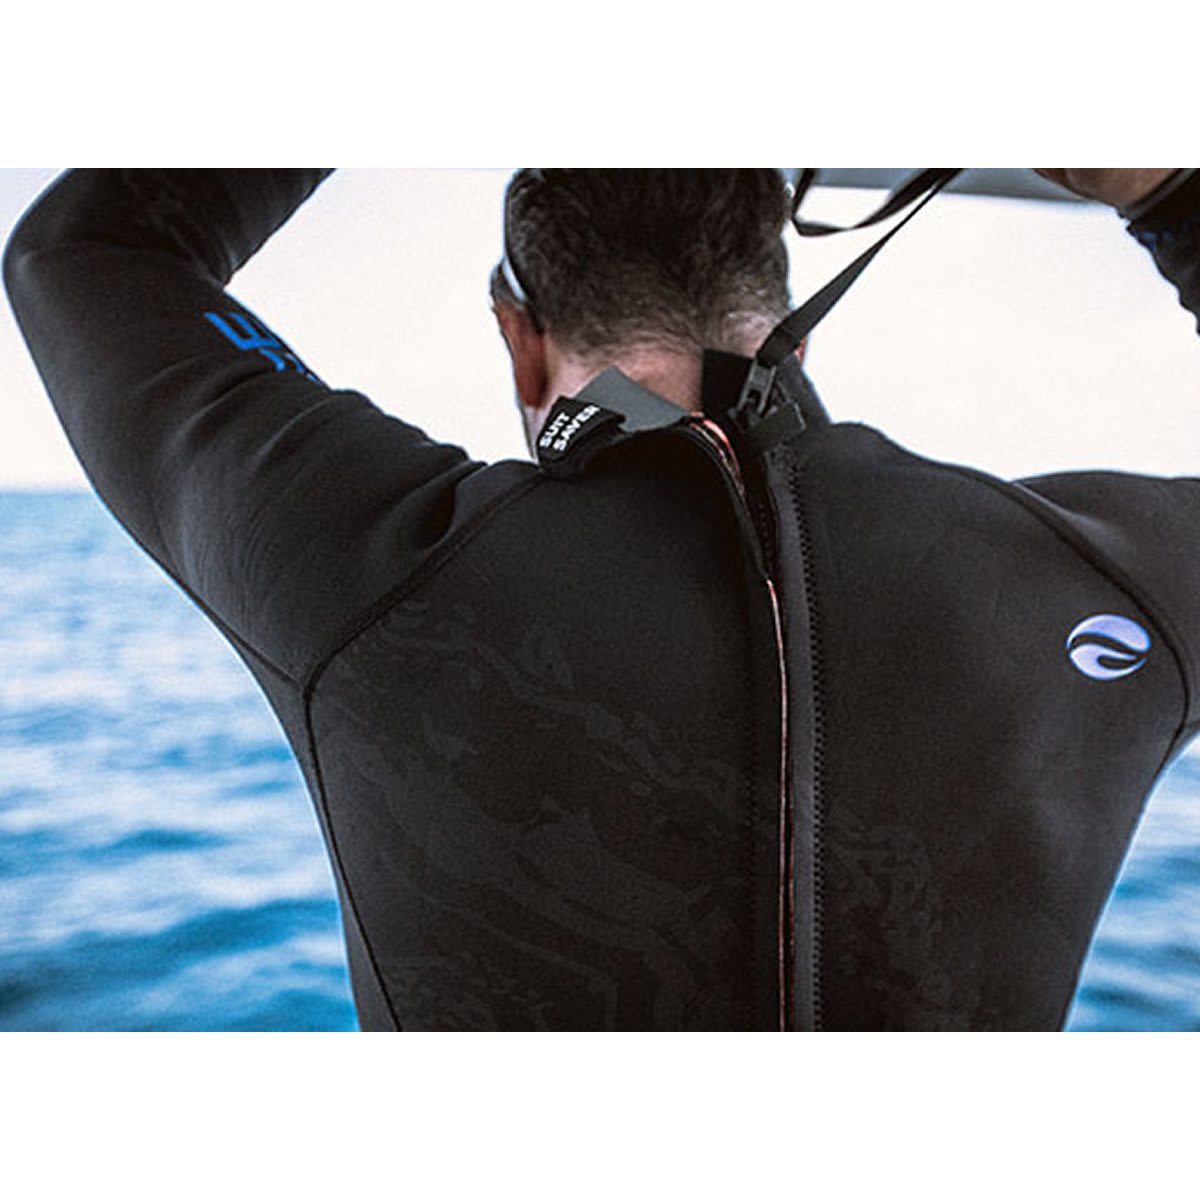 Bare Bare Velocity Ultra 5mm Full Wetsuit - Mens by Oyster Diving Shop